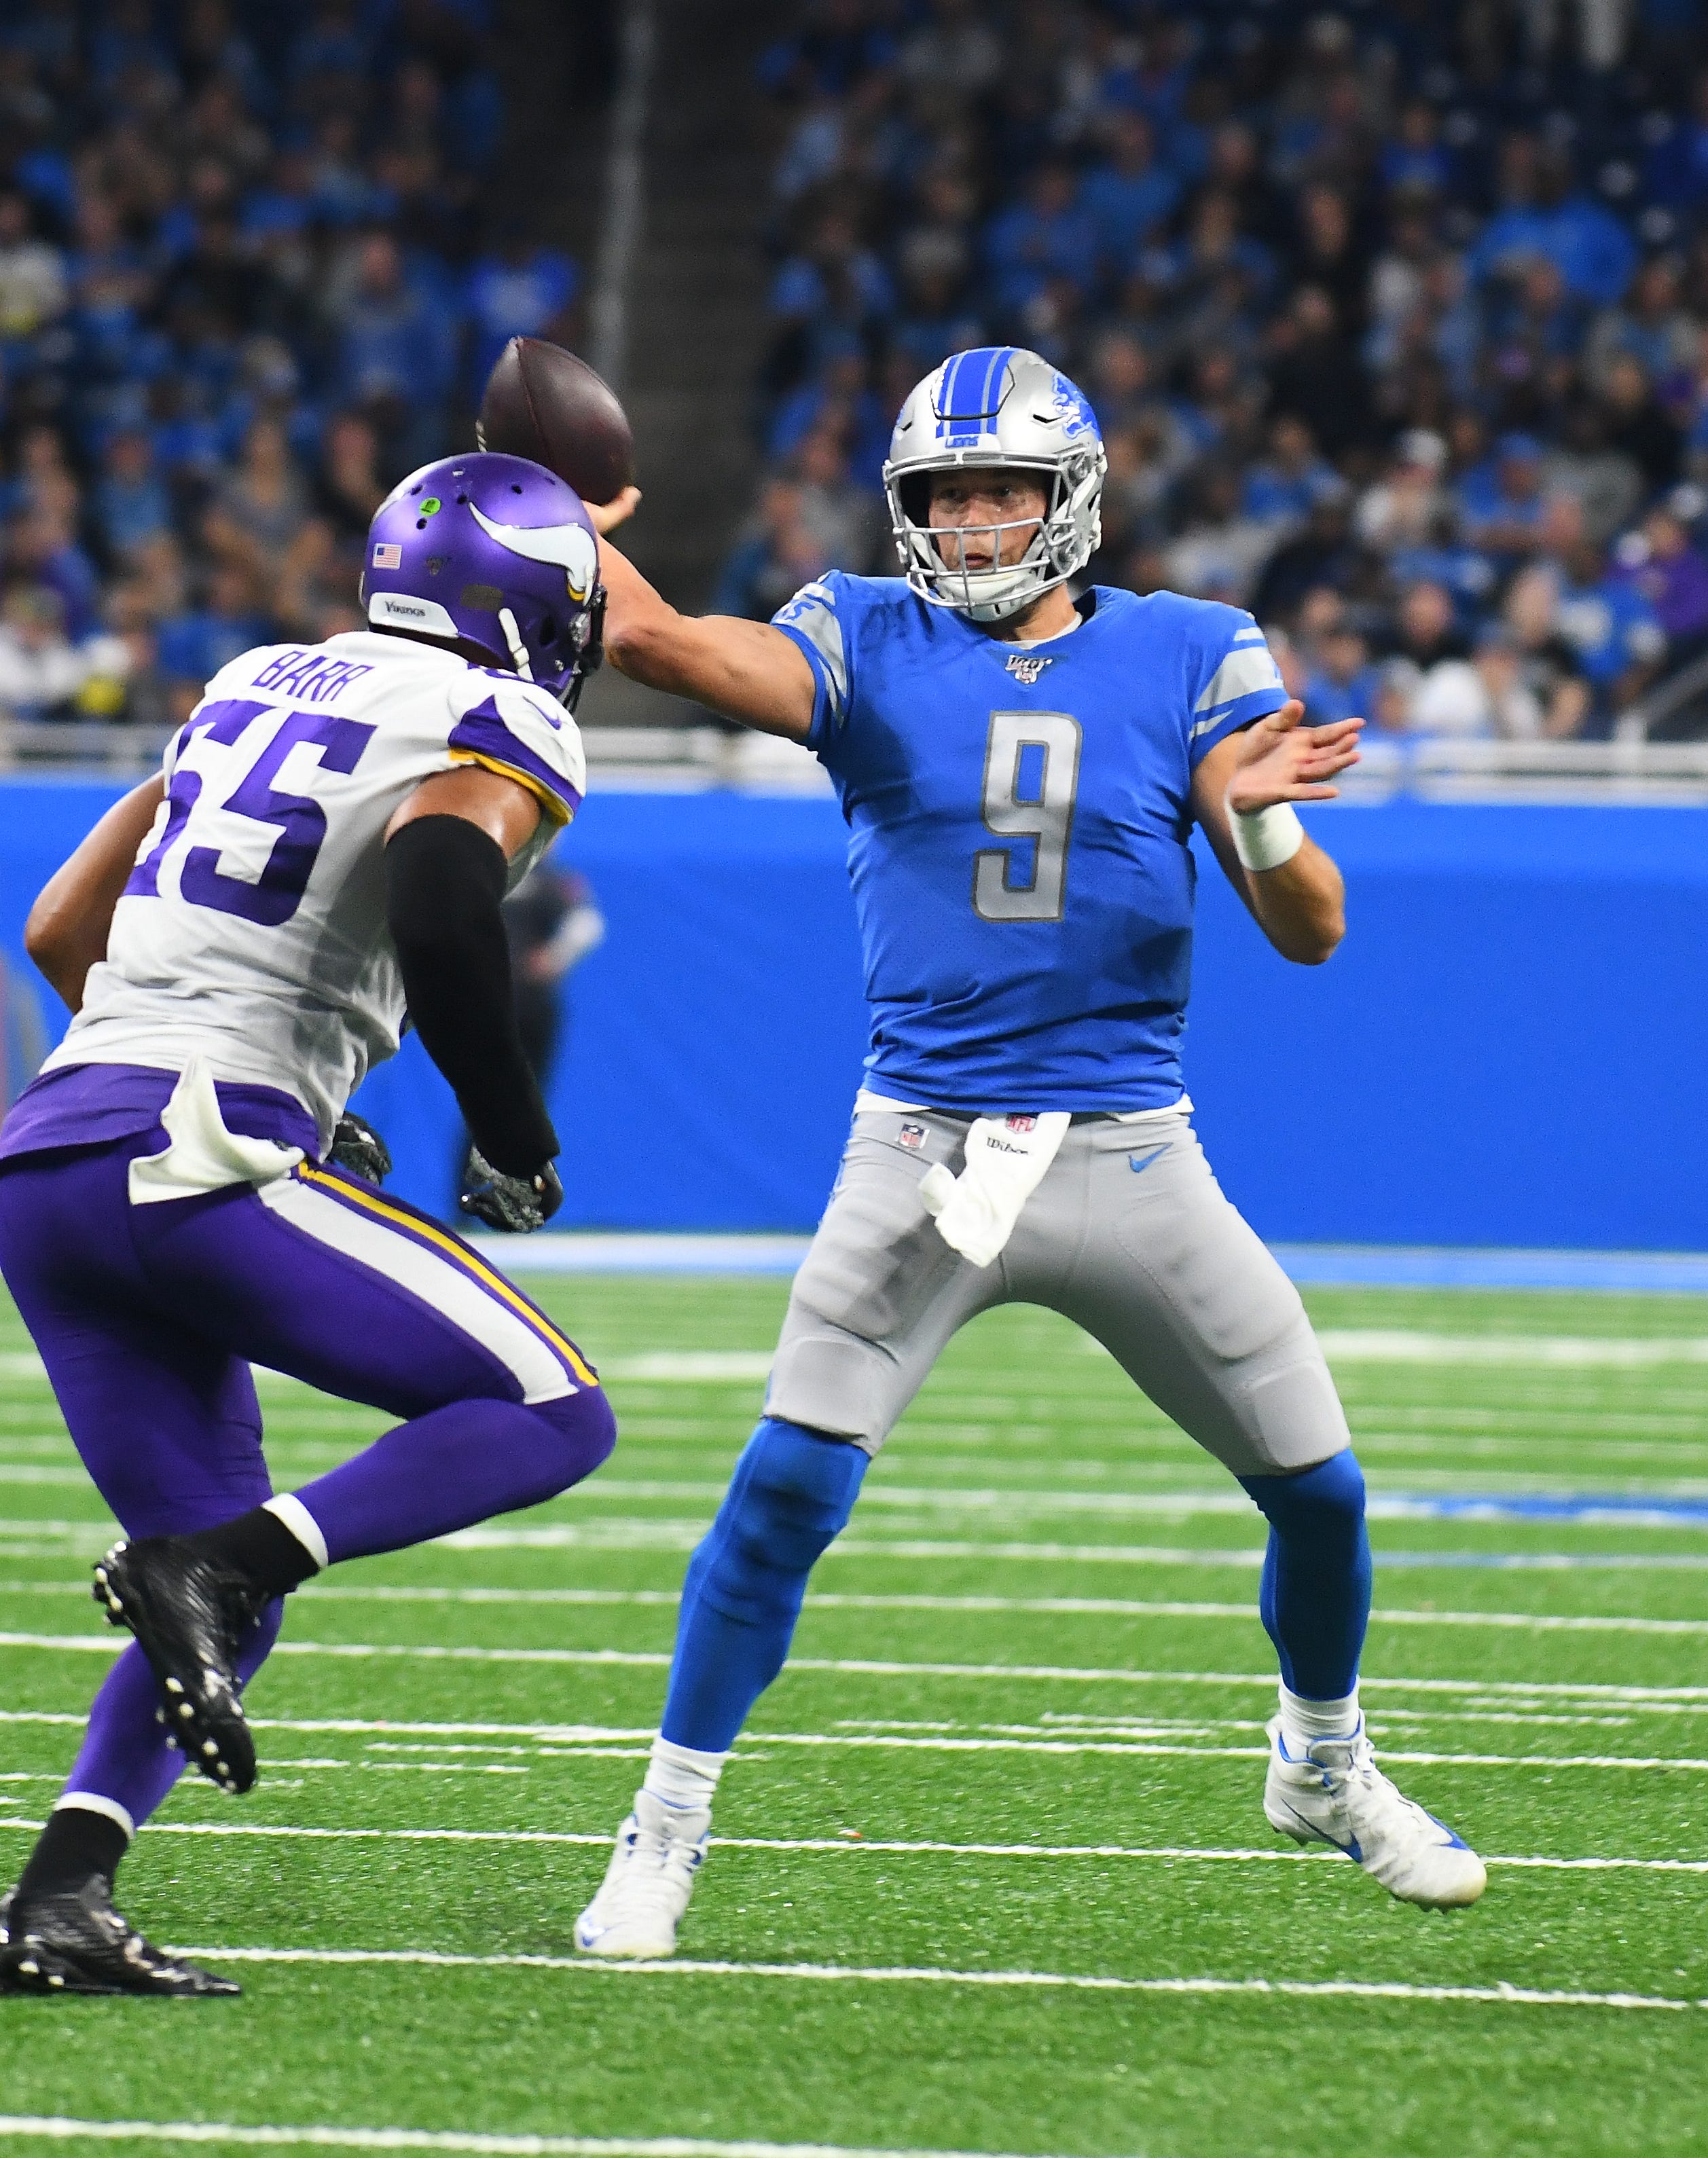 Lions quarterback Matthew Stafford throws a pass in the second quarter.